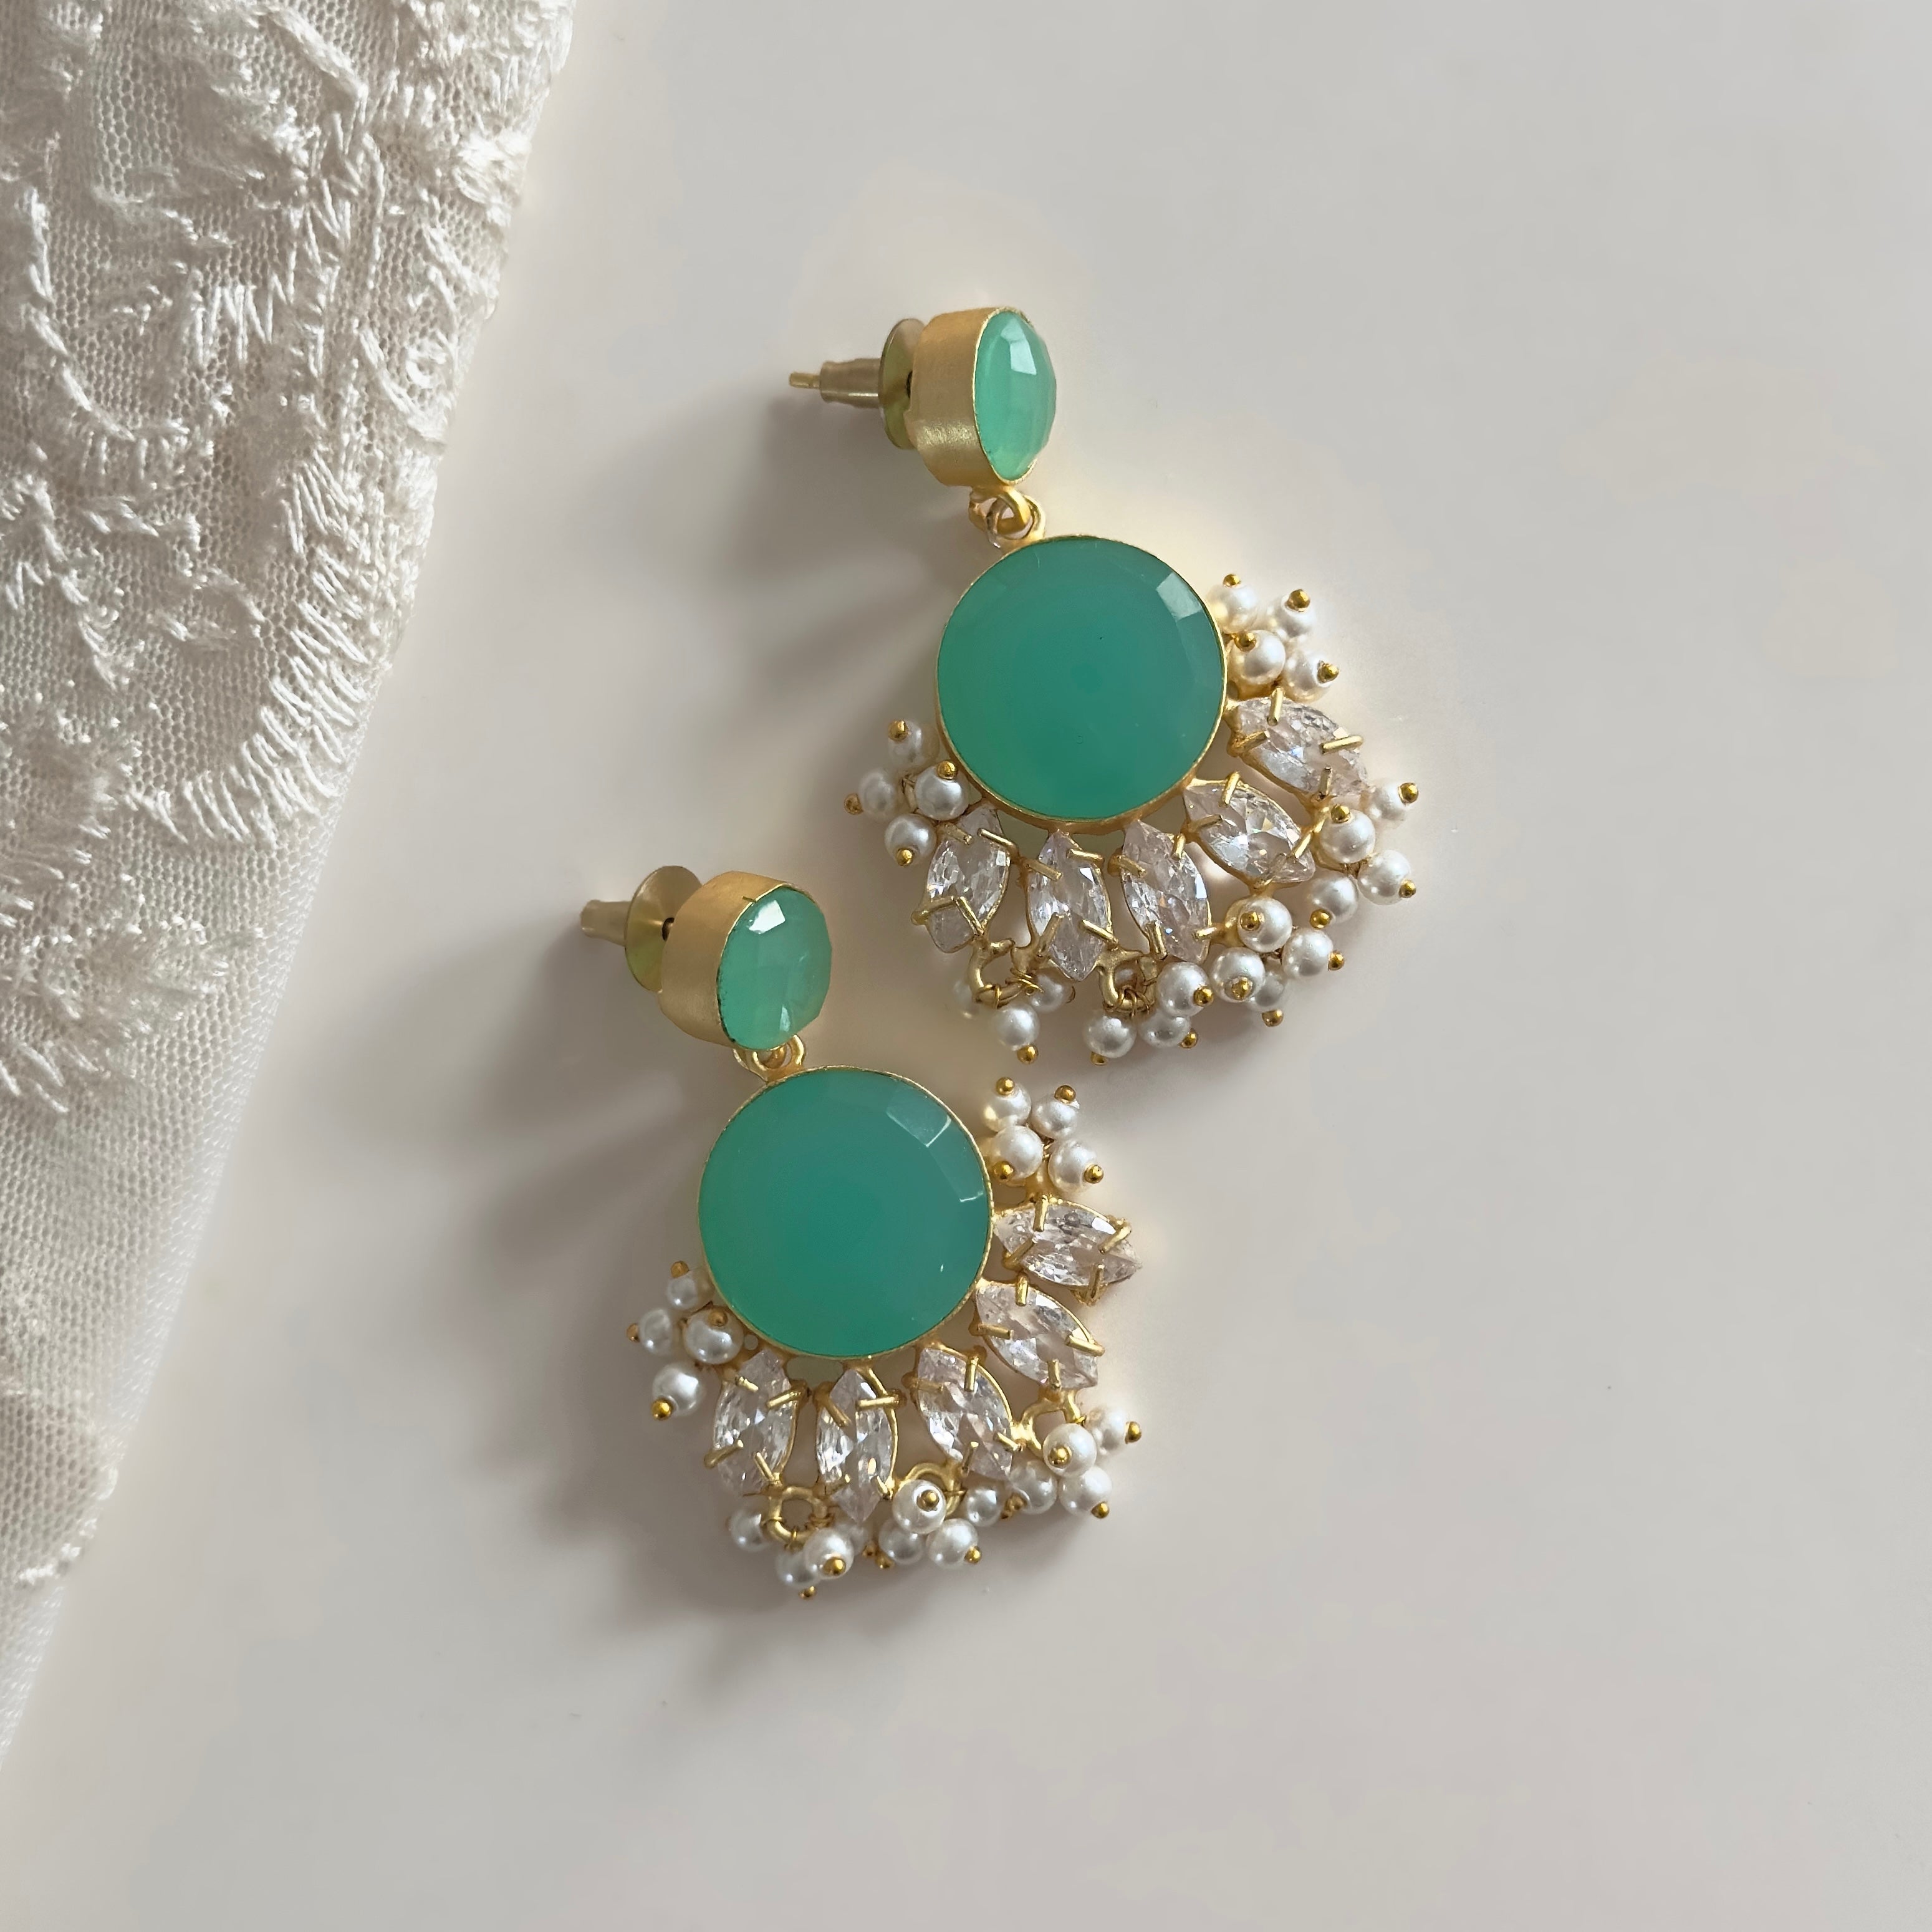 Indulge in elegance with our Marina Crystal Drop Earrings. The vibrant aquamarine and stunning CZ crystals will add a touch of glamour to any outfit. Elevate your style and make a statement with these mesmerizing earrings!